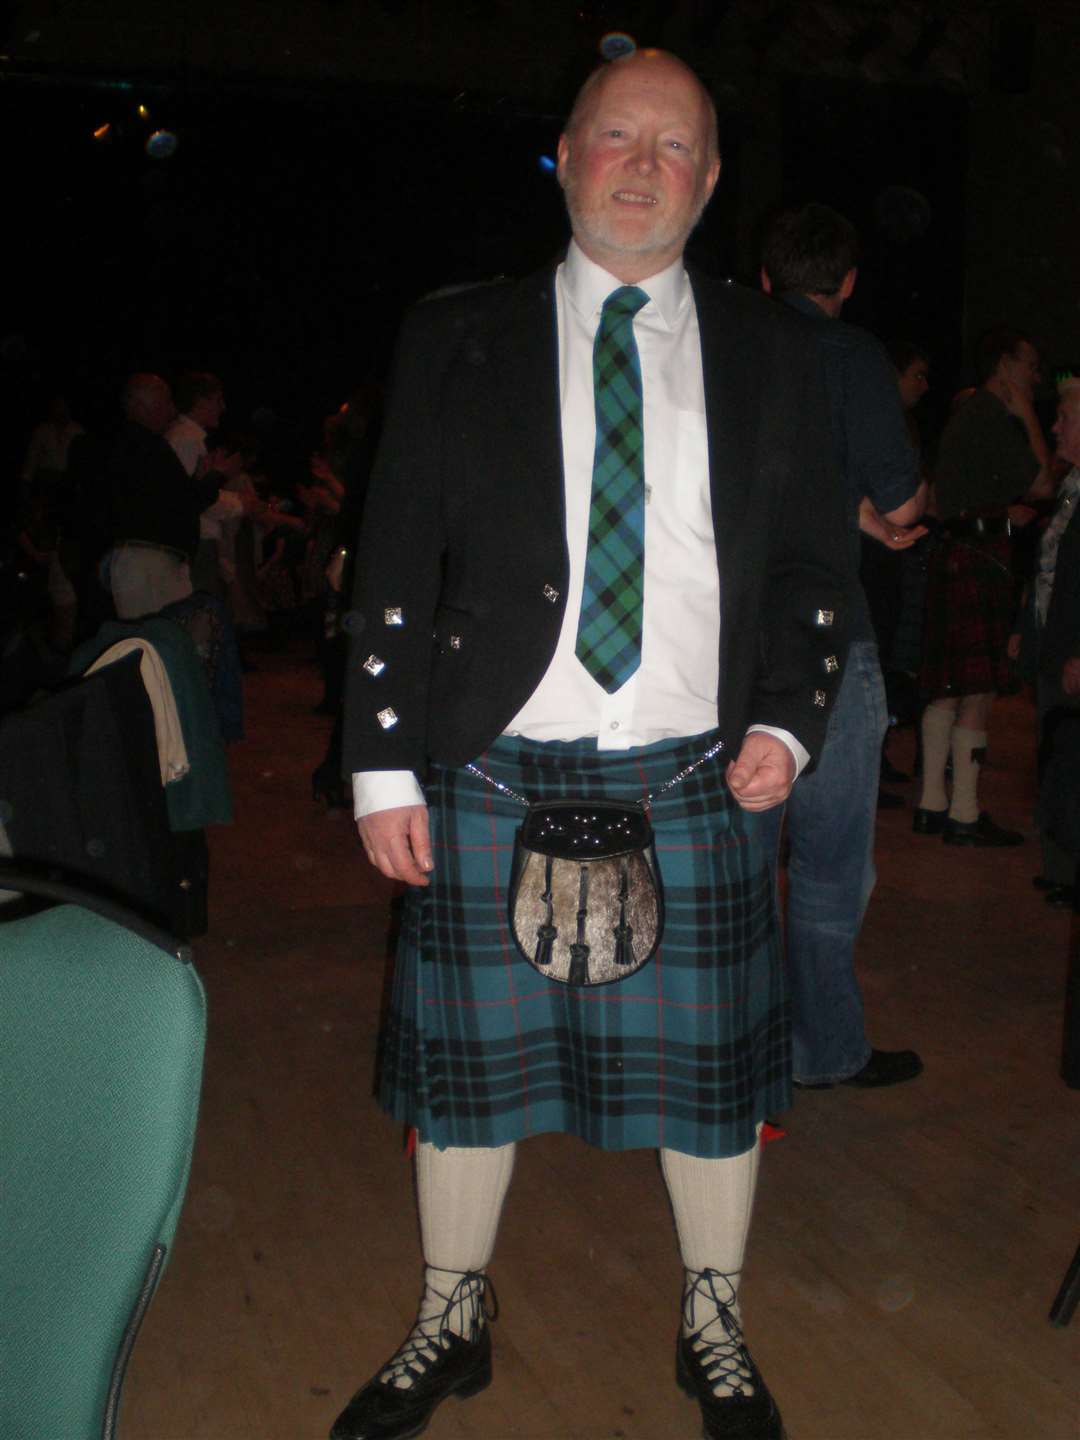 Proud Scot Martin pictured in 2011